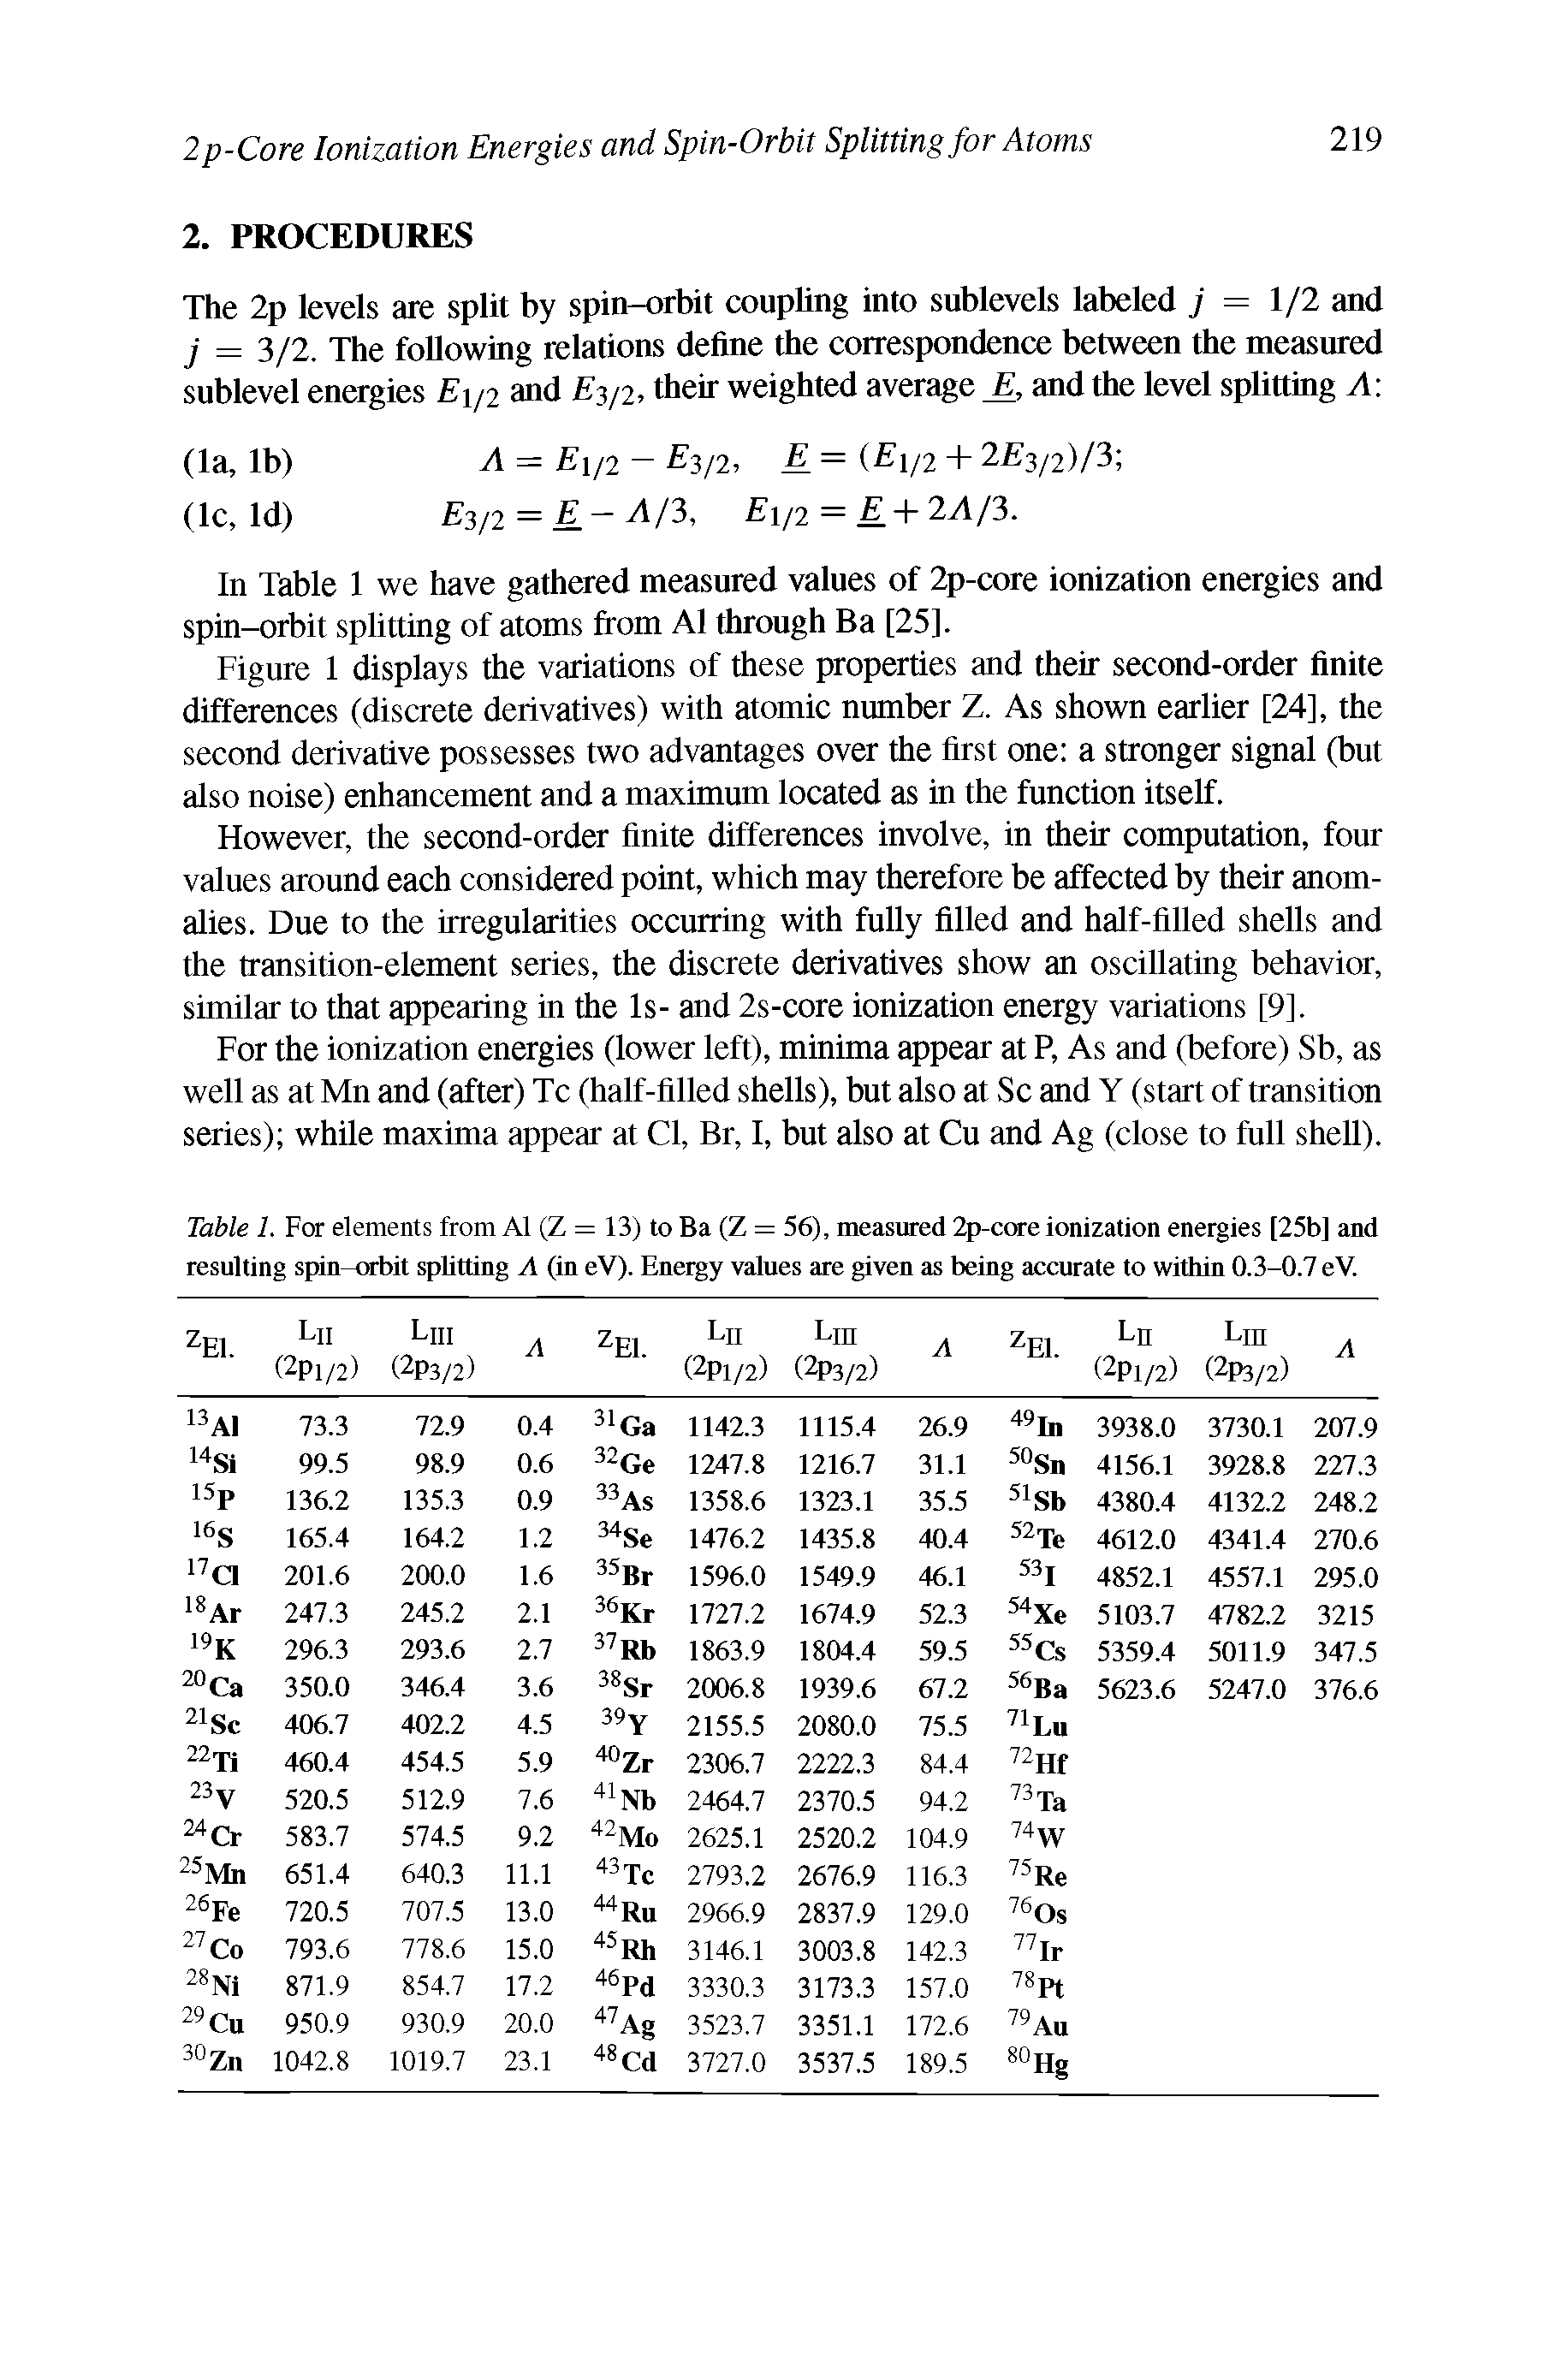 Table 1. For elements from A1 (Z = 13) to Ba (Z = 56), measured 2p-core ionization energies [25b] and resulting spin-orbit splitting A (in eV). Energy values are given as being accurate to within 0.3-0.7 eV.